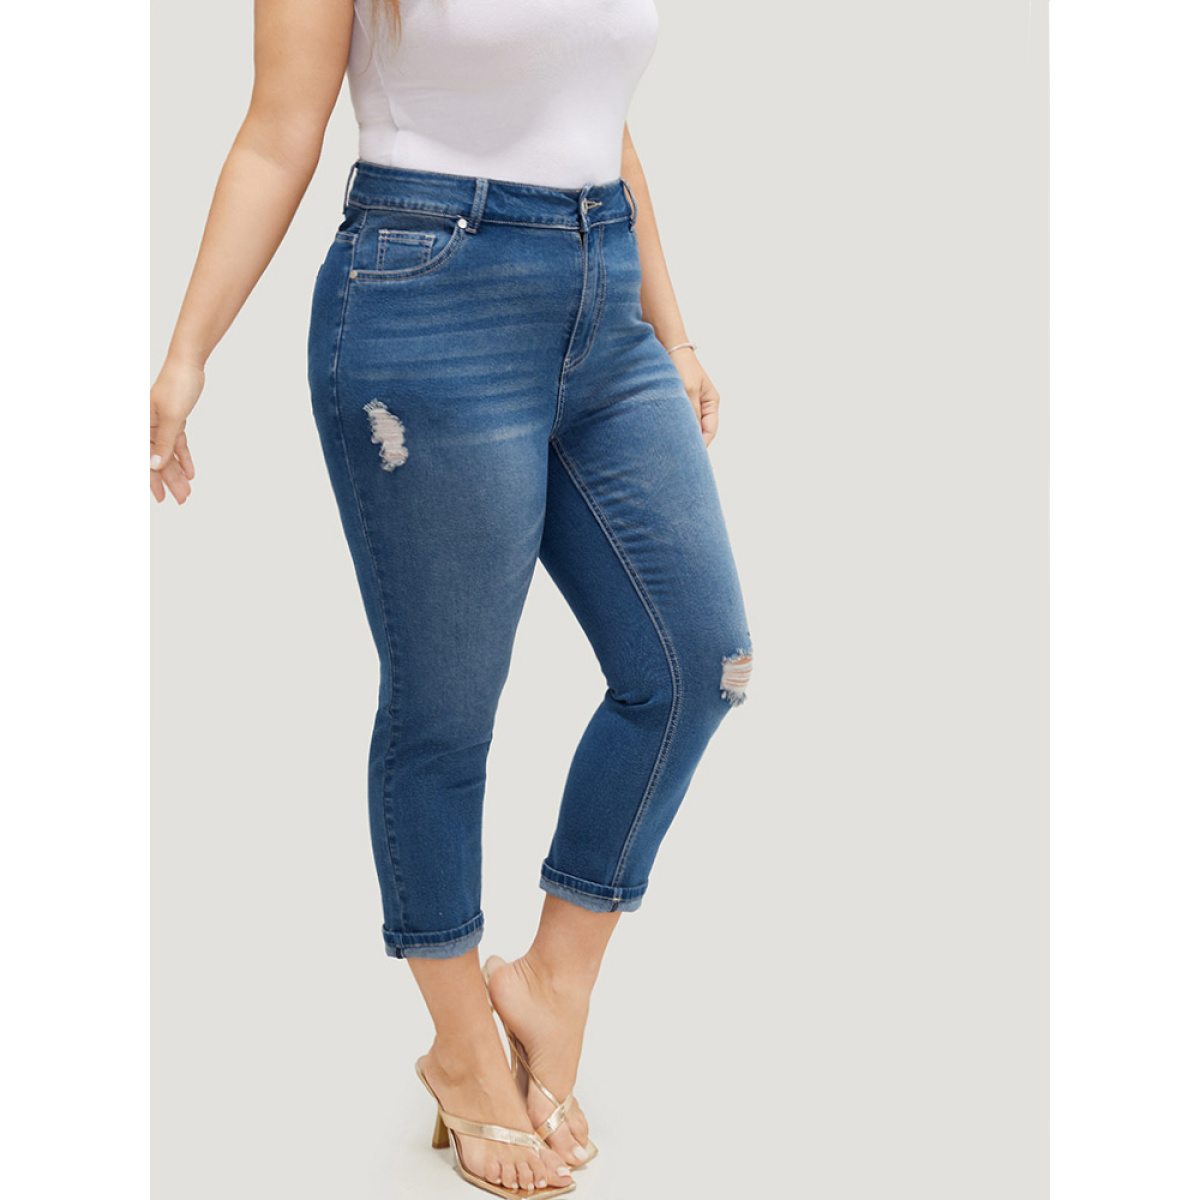 

Plus Size Very Stretchy High Rise Dark Wash Ripped Detail Cropped Jeans Women Blue Casual Plain High stretch Pocket Jeans BloomChic